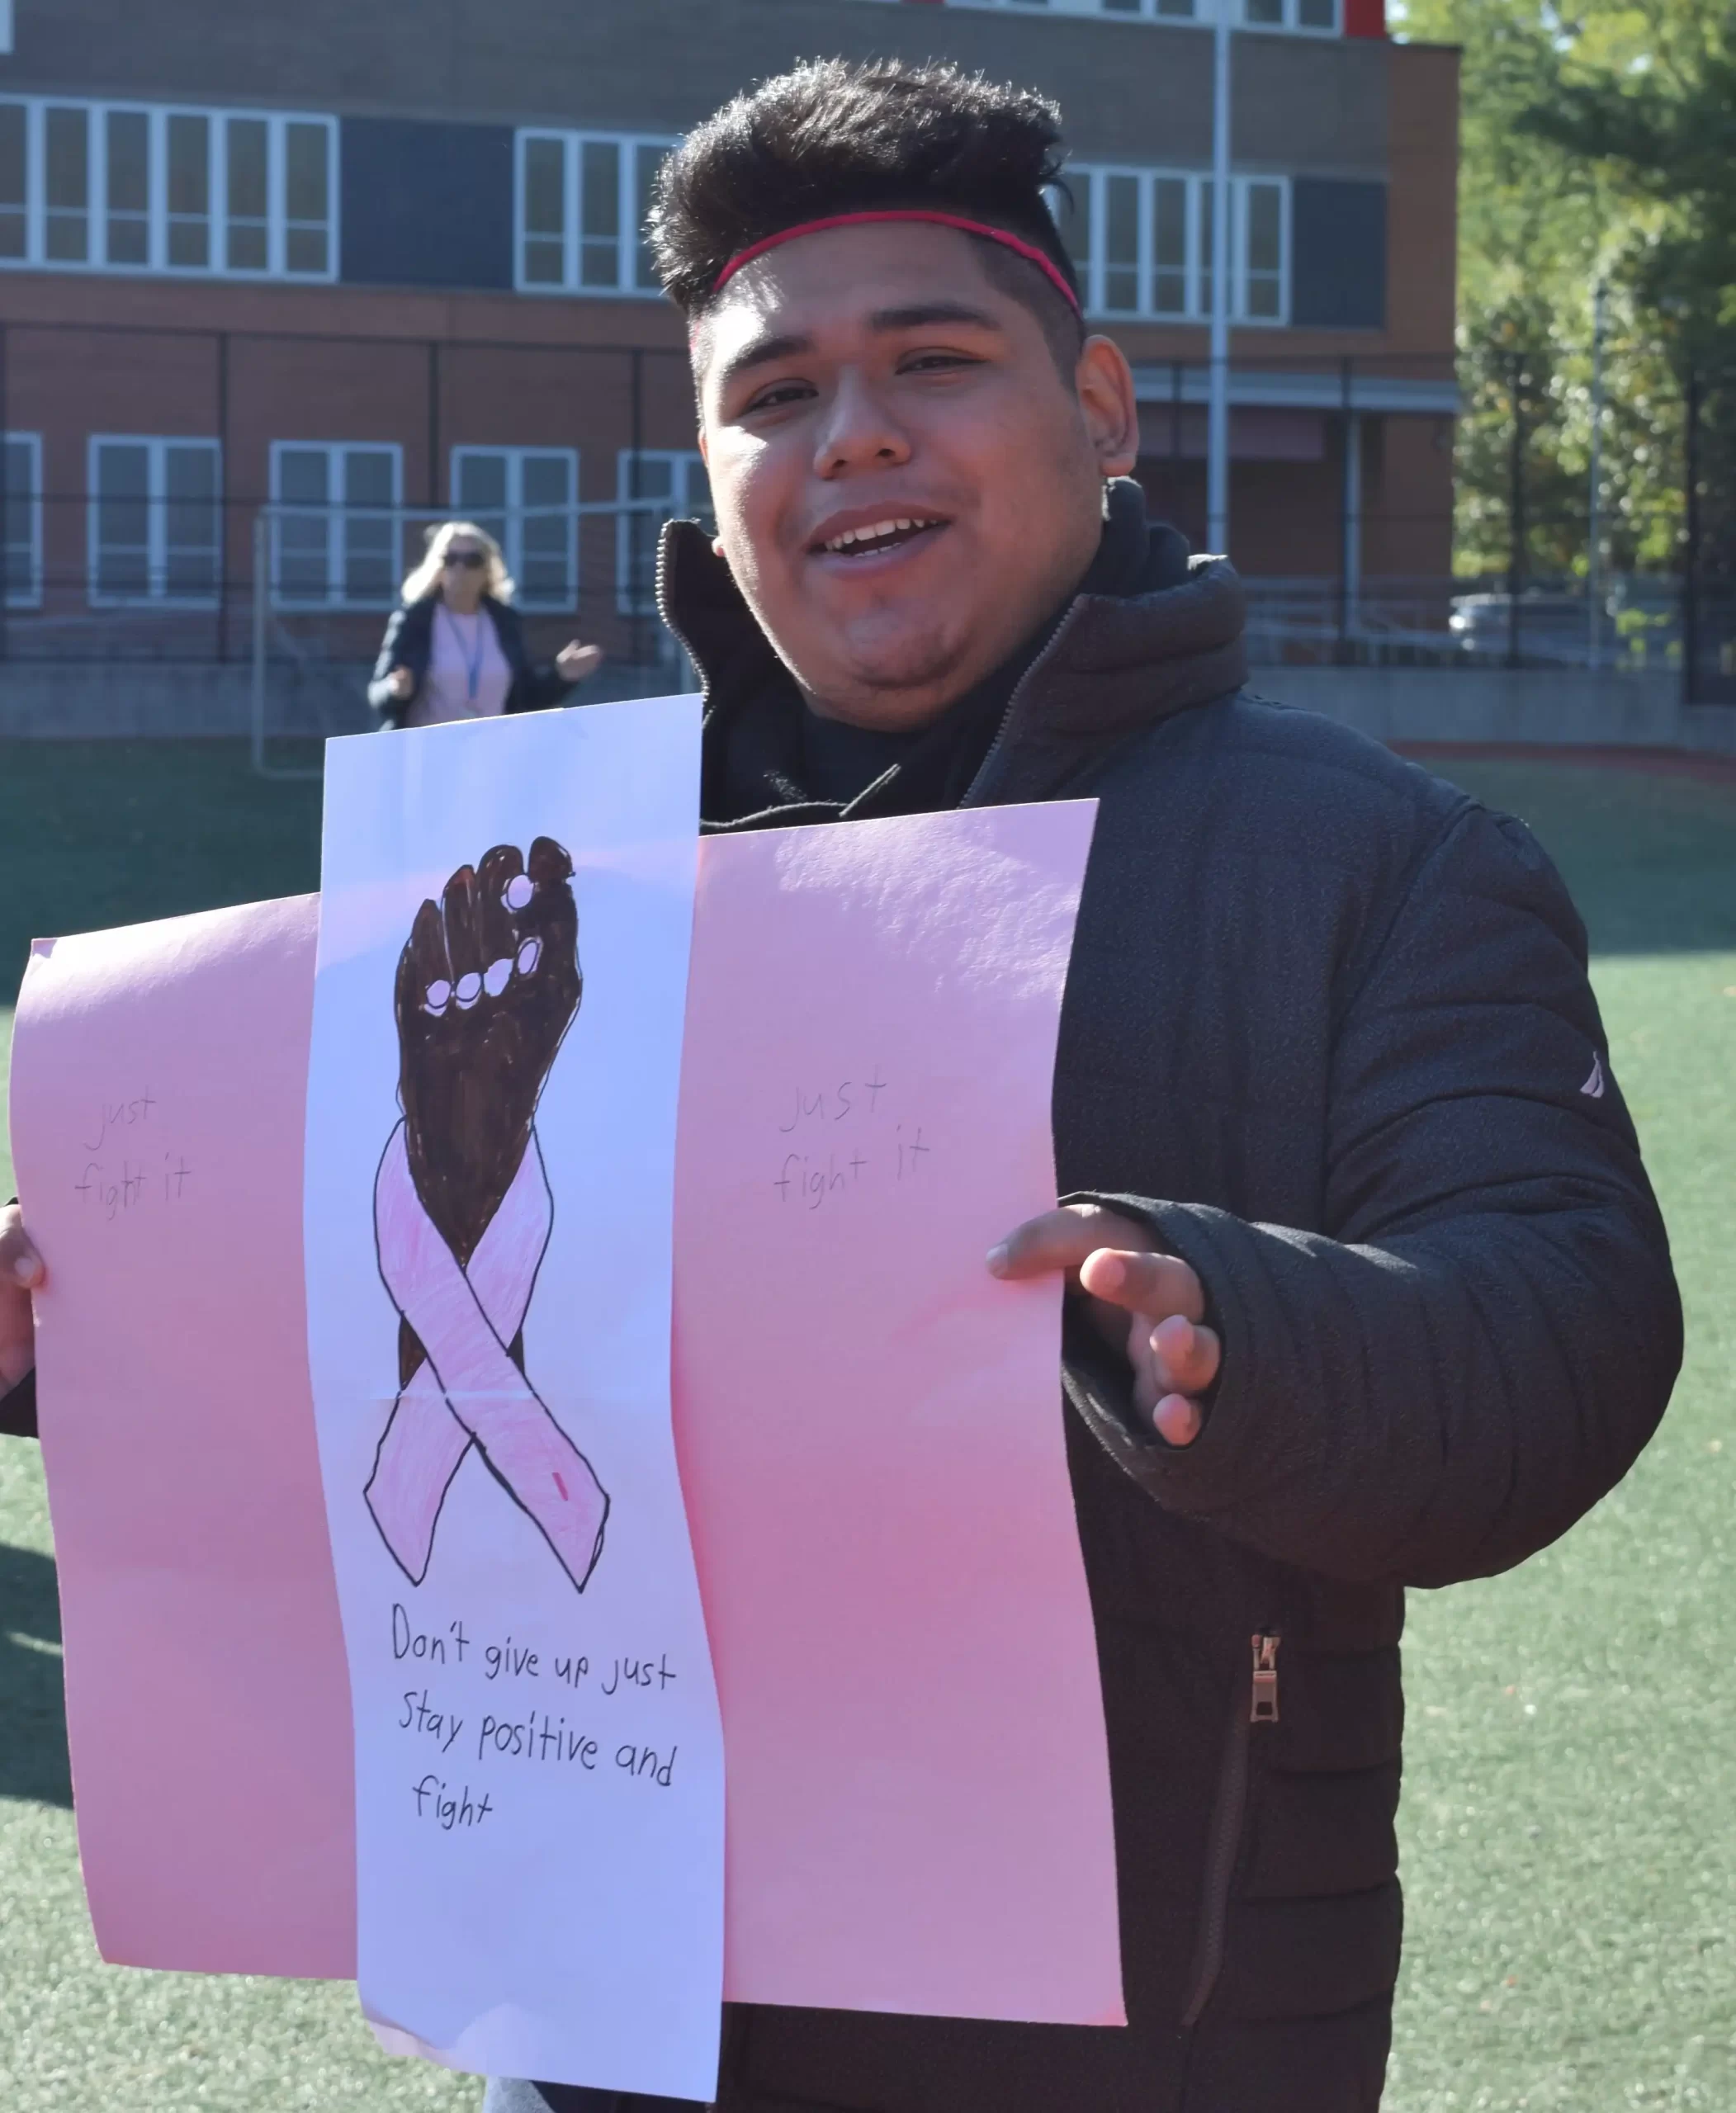 Luis with the poster he made for Breast Cancer Awareness